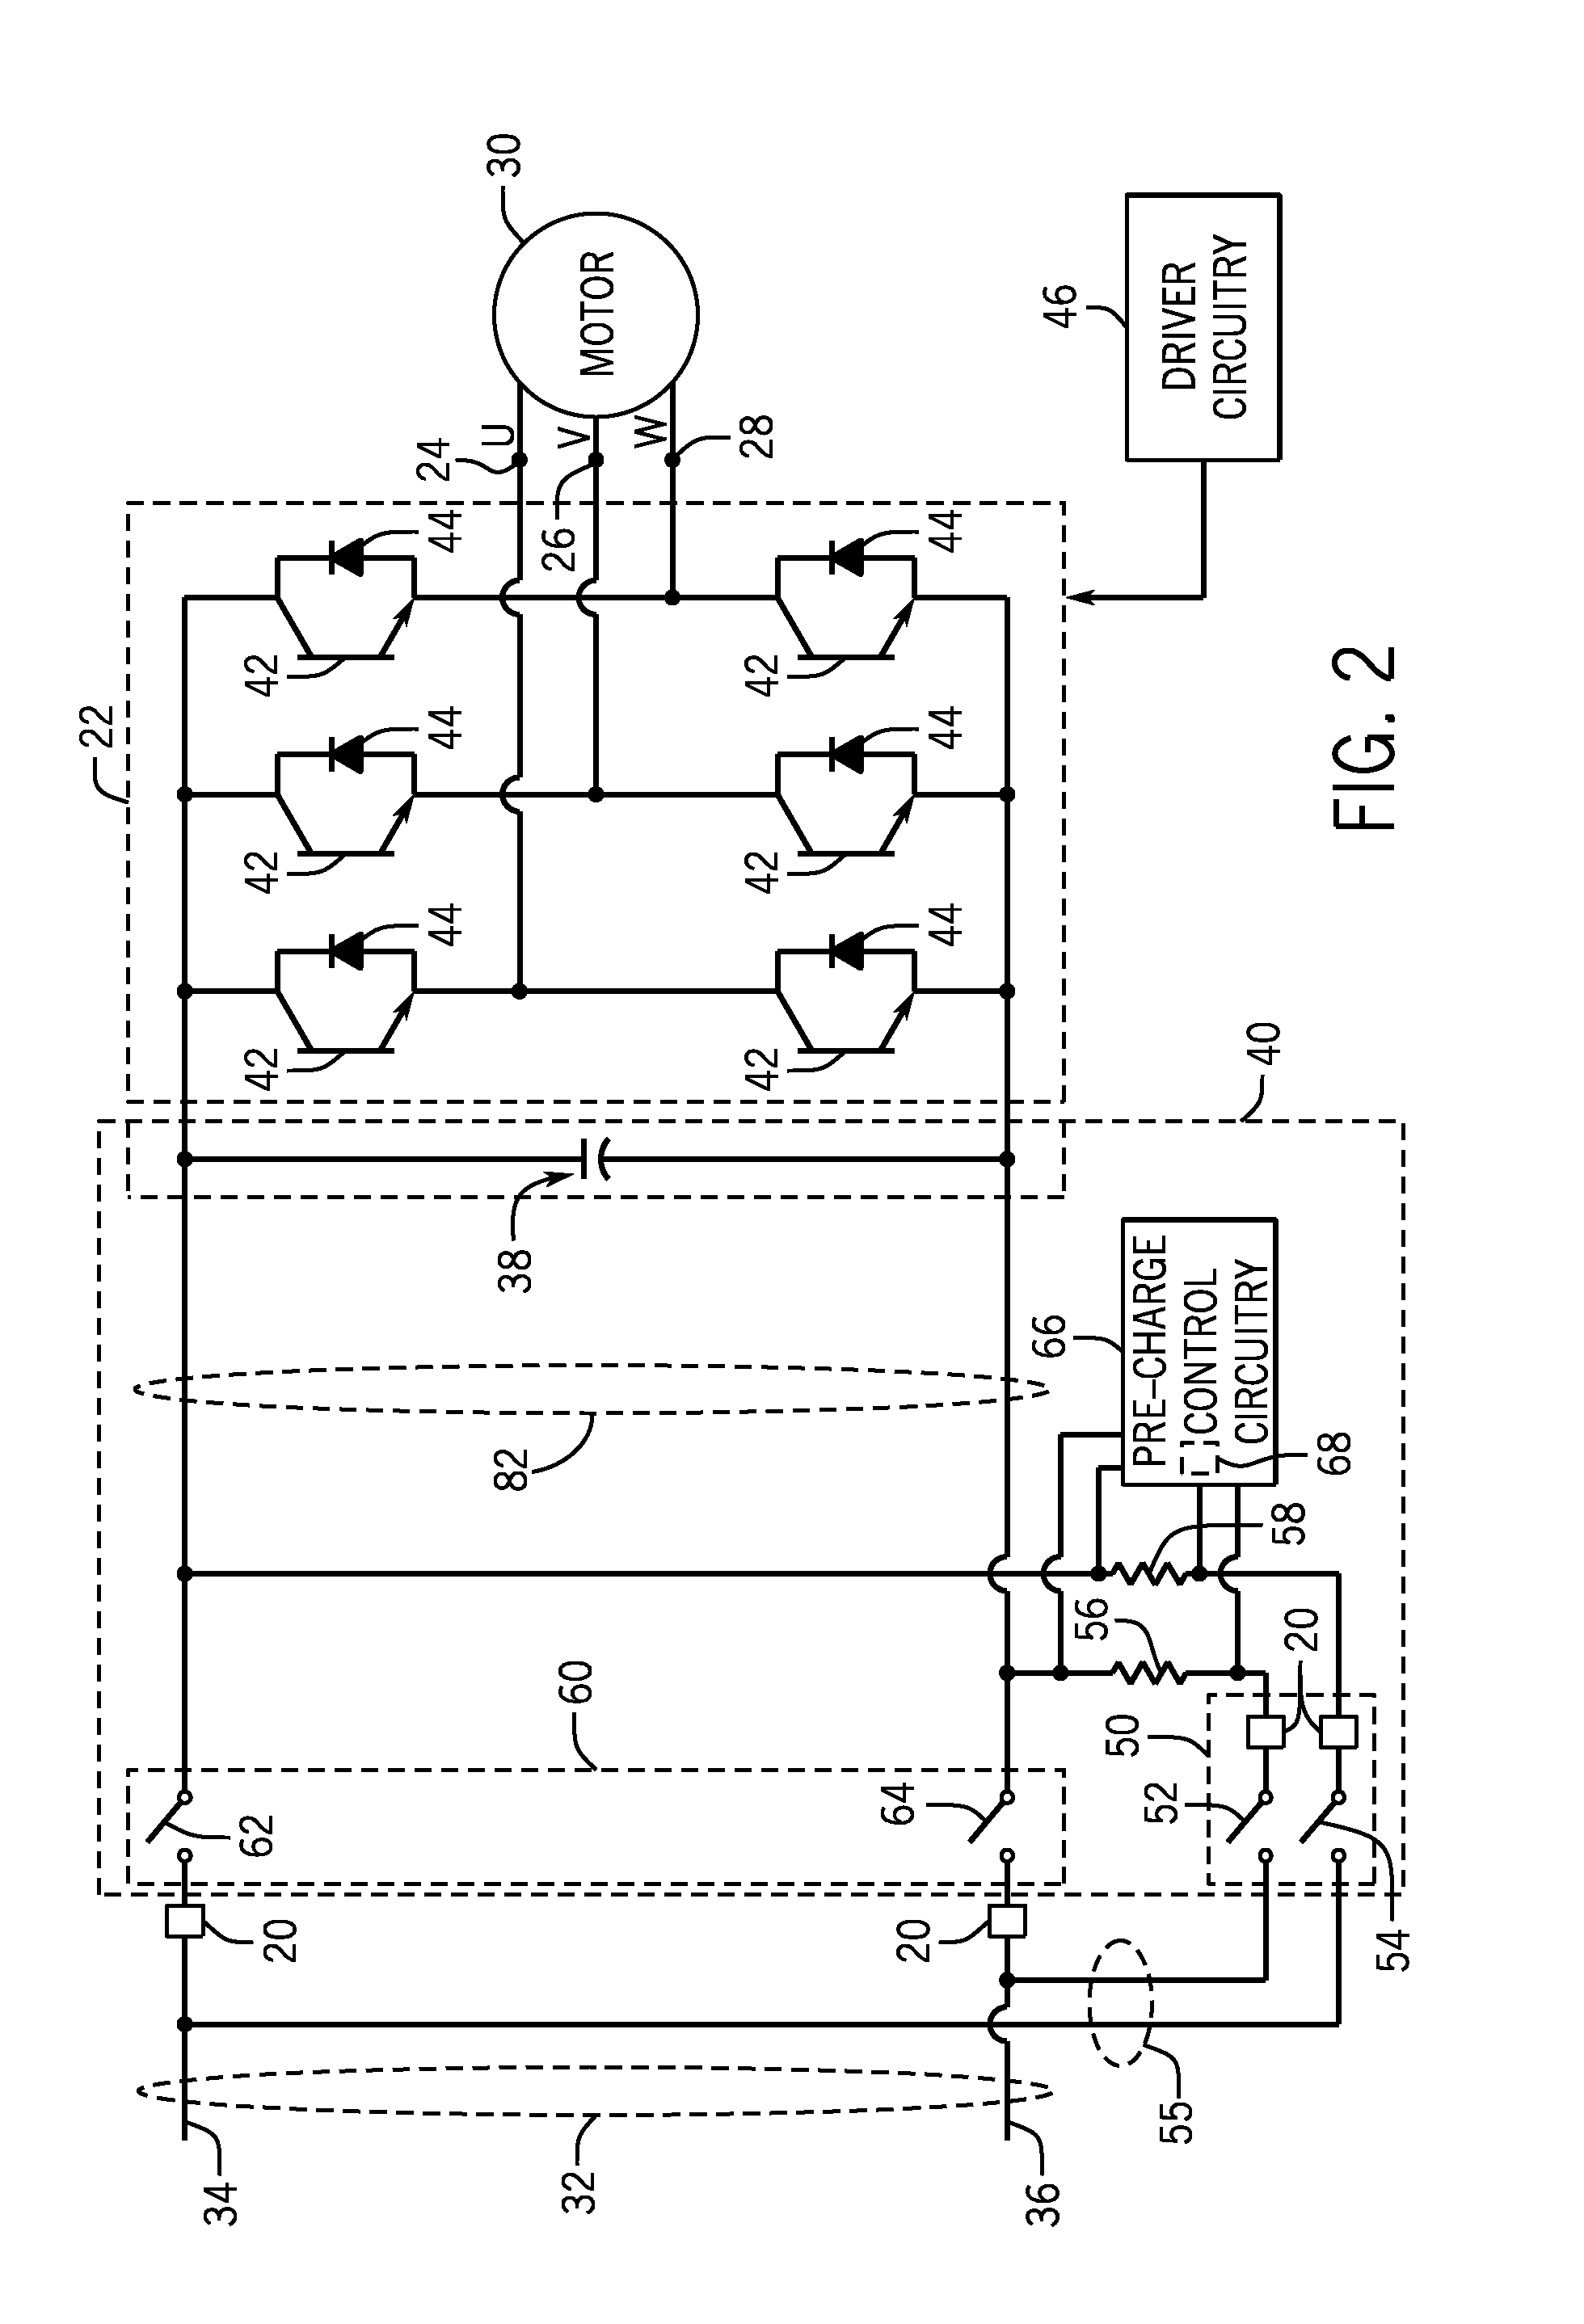 Systems and methods for manufacturing a pre-charge circuit module